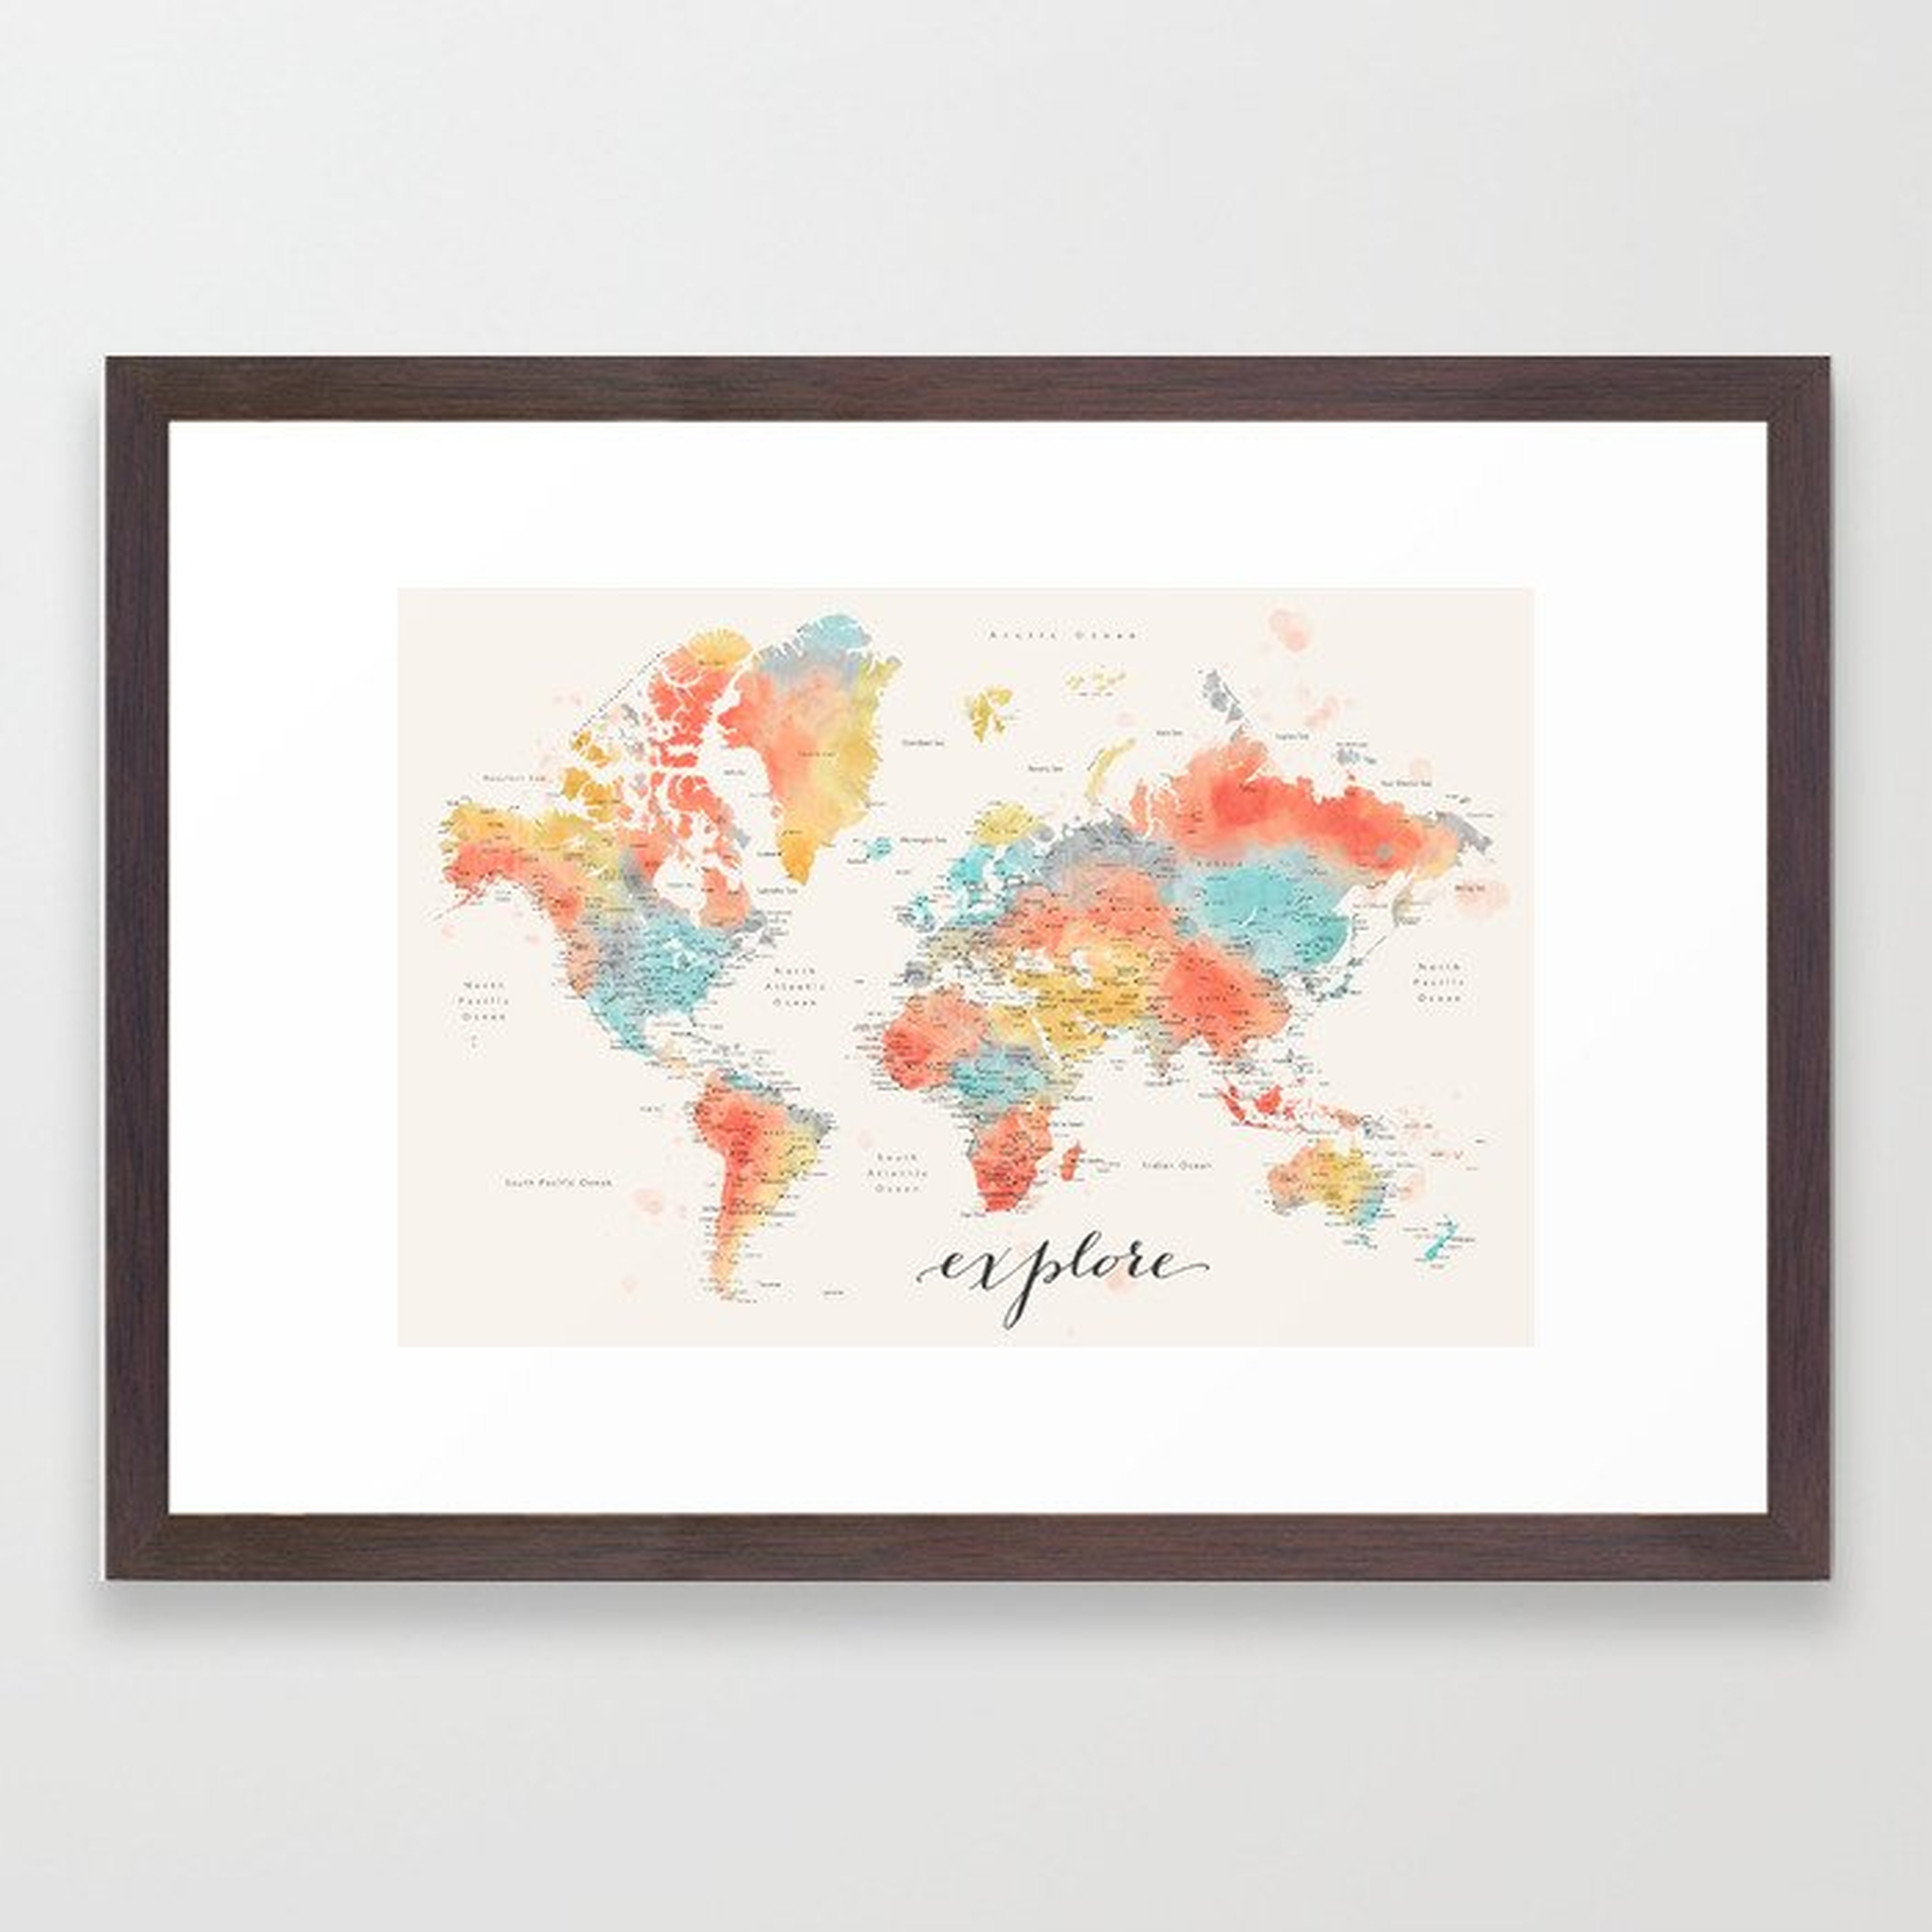 "Explore" - Colorful watercolor world map with cities Framed Art Print - Society6